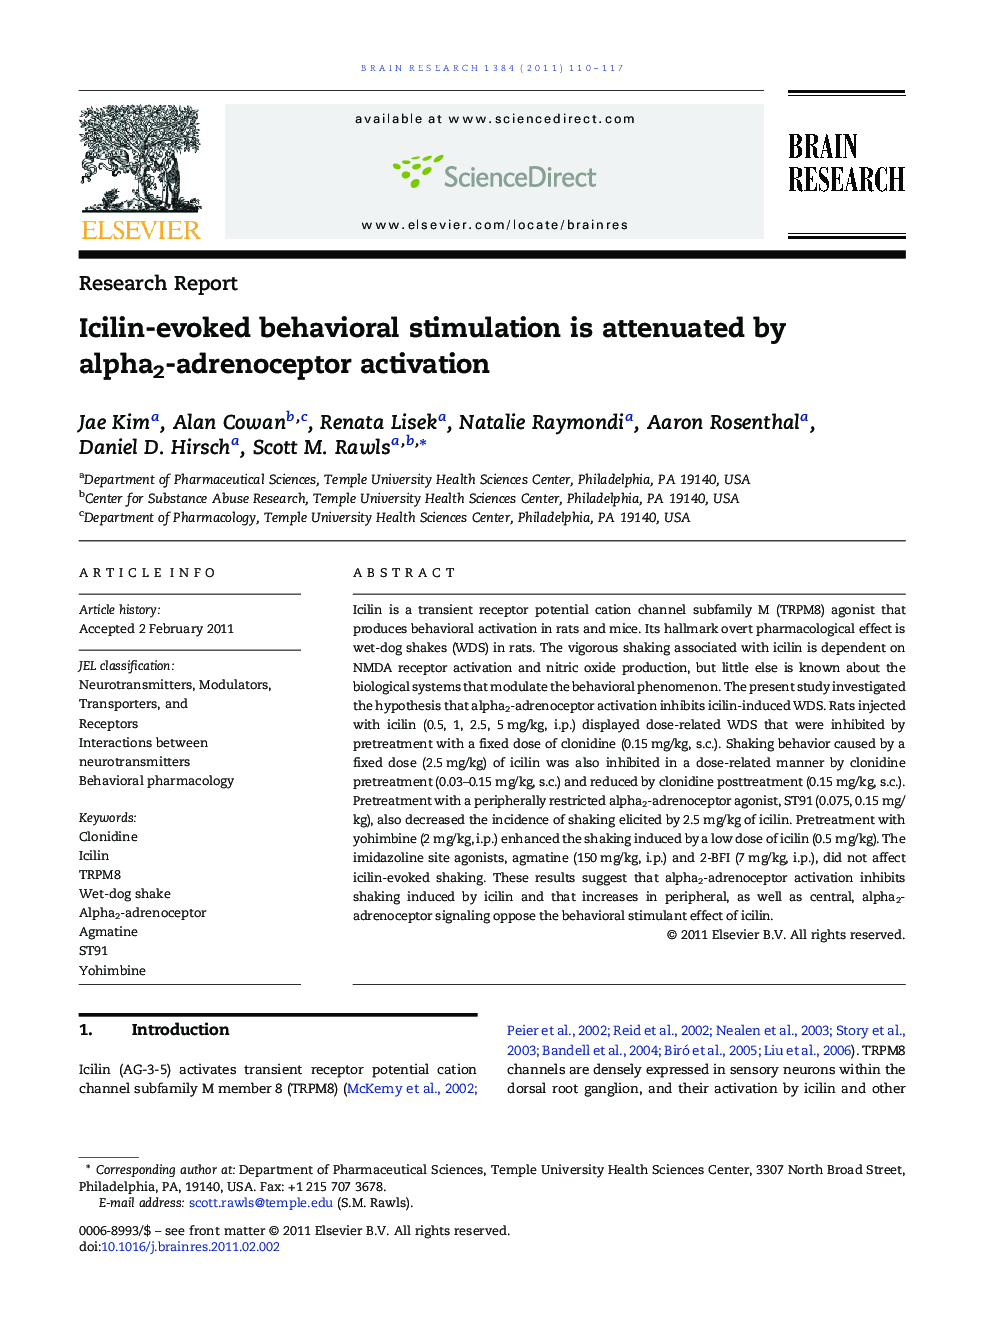 Research ReportIcilin-evoked behavioral stimulation is attenuated by alpha2-adrenoceptor activation